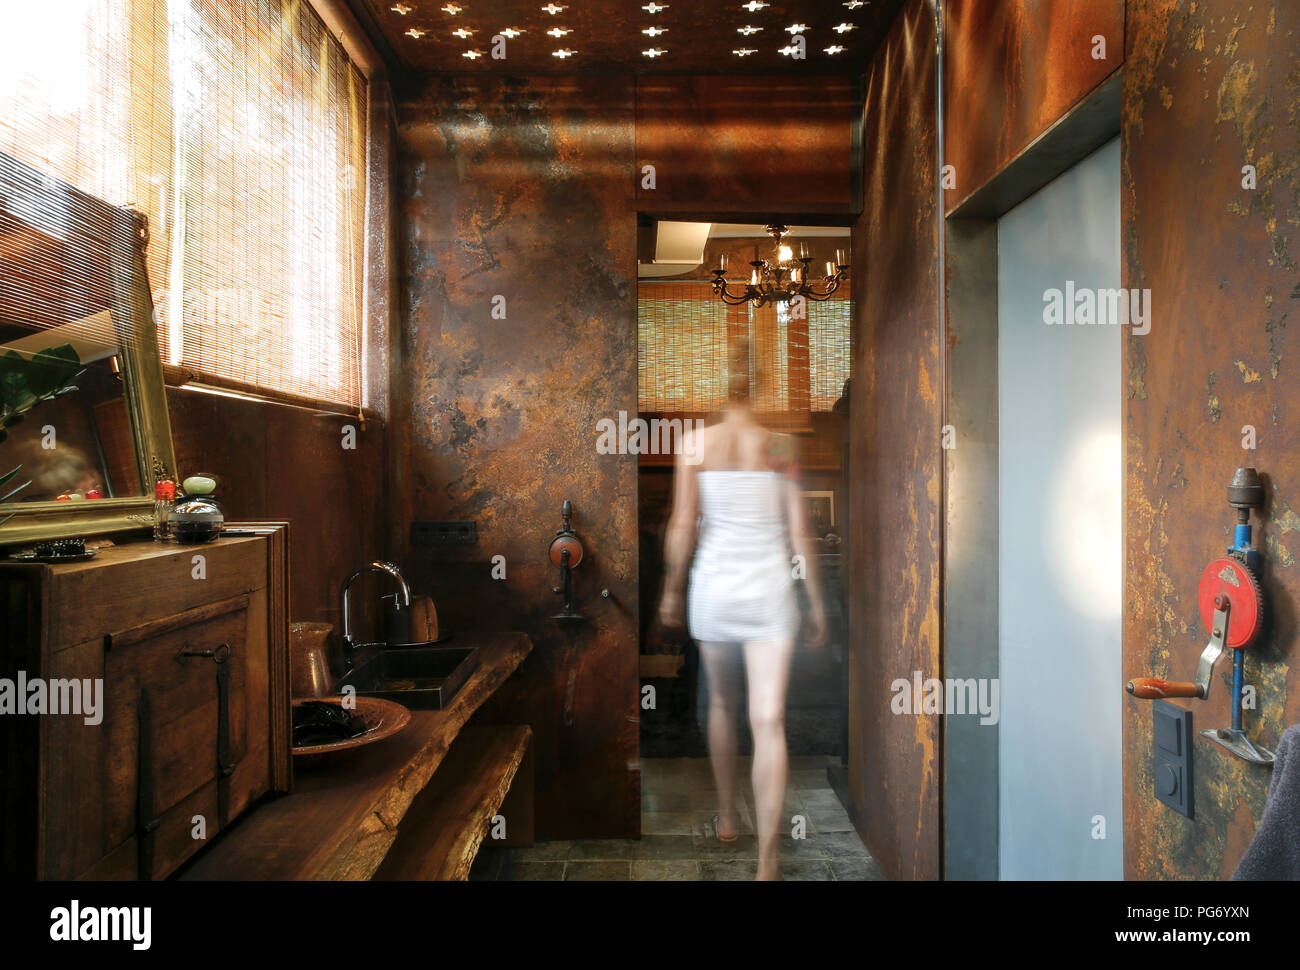 Back view of woman walking in  bathroom with corten steel wall cladding and ceiling light effects Stock Photo